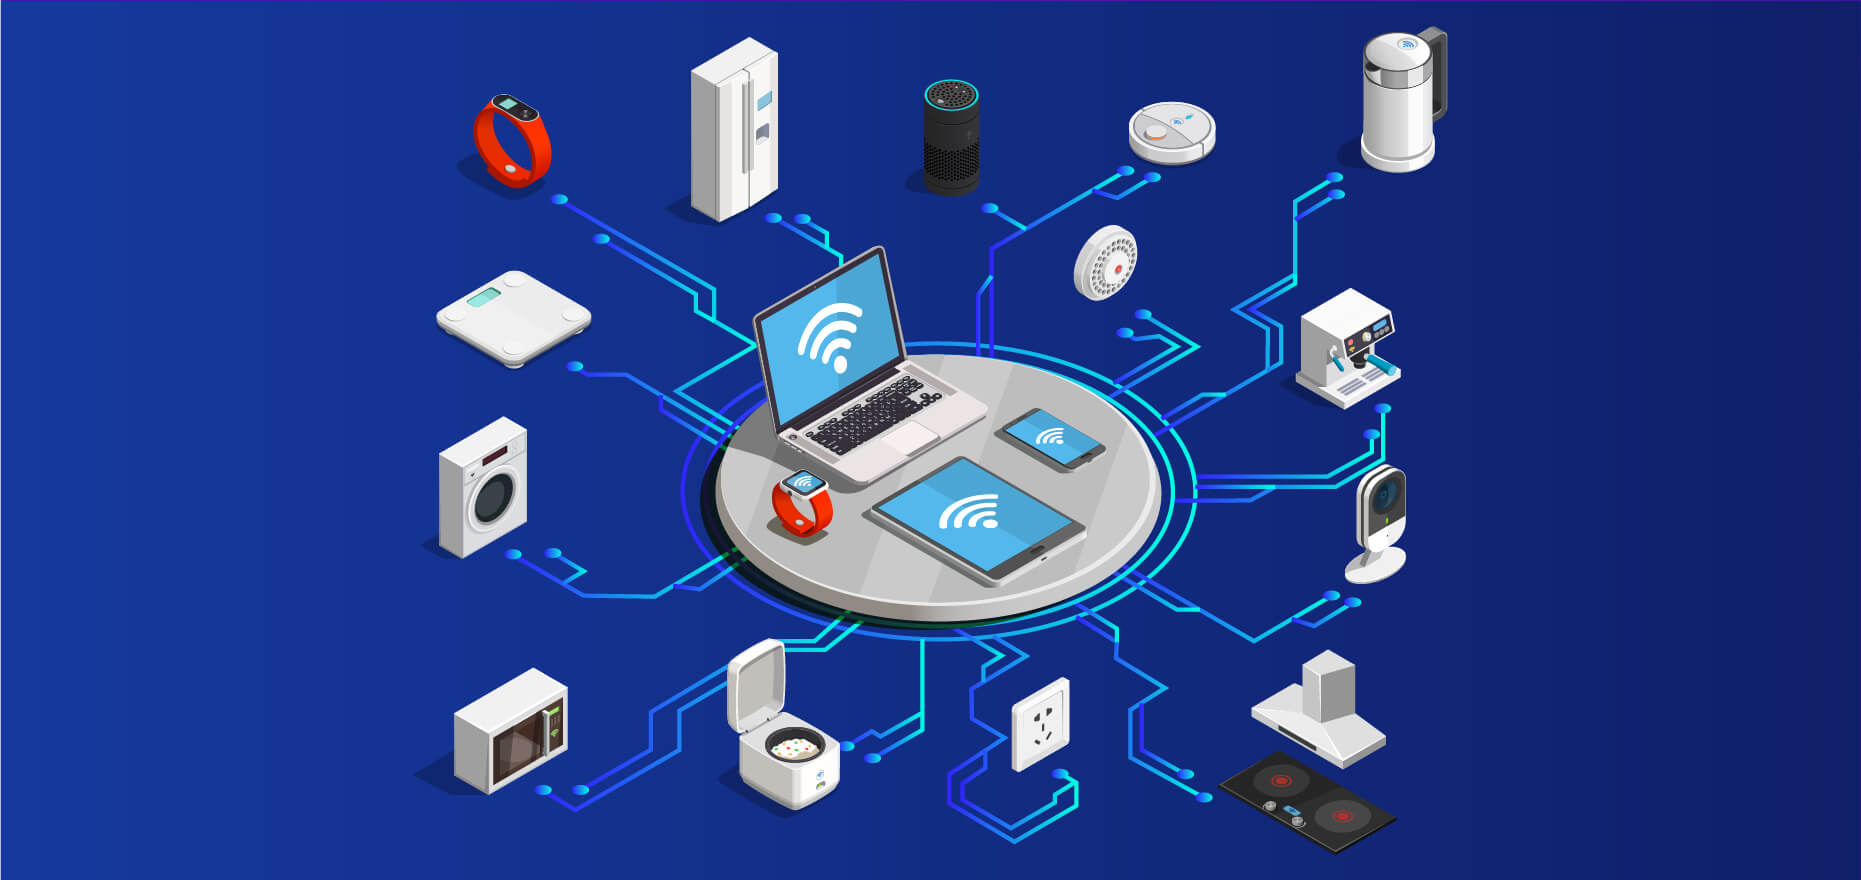 Discover the Top 10 IoT Applications in 2020